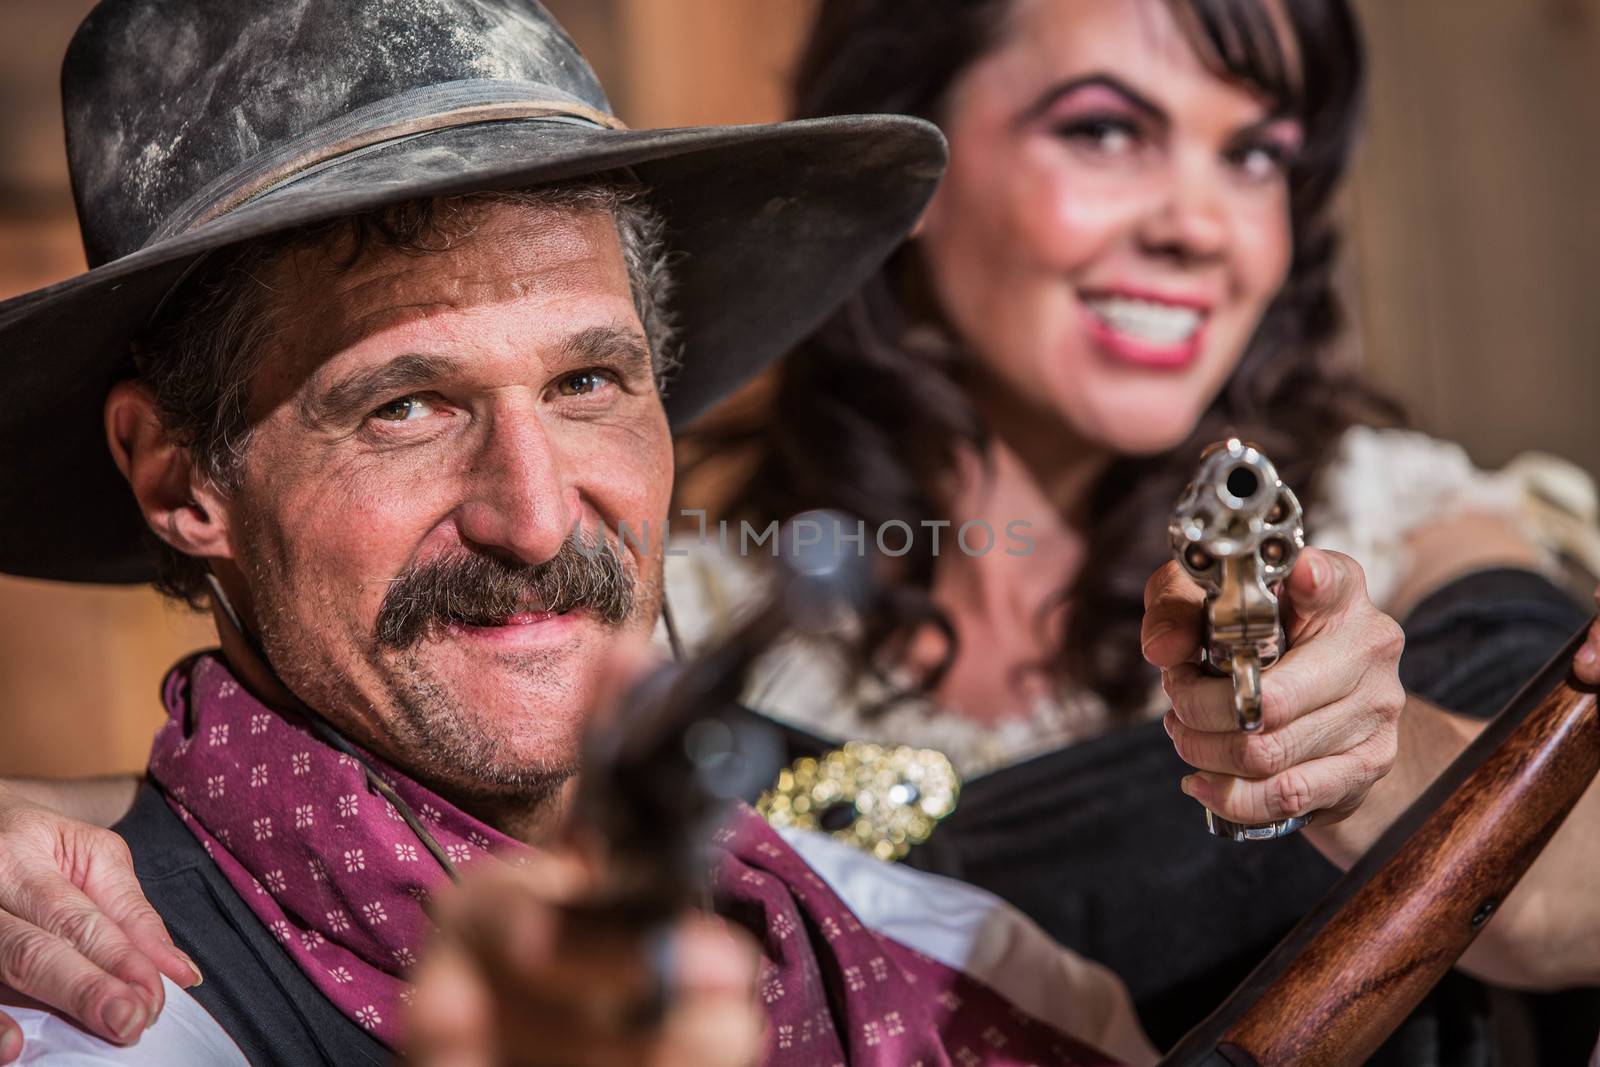 A Smiling Cowboy and Saloon Girl Point Their Weapons at You